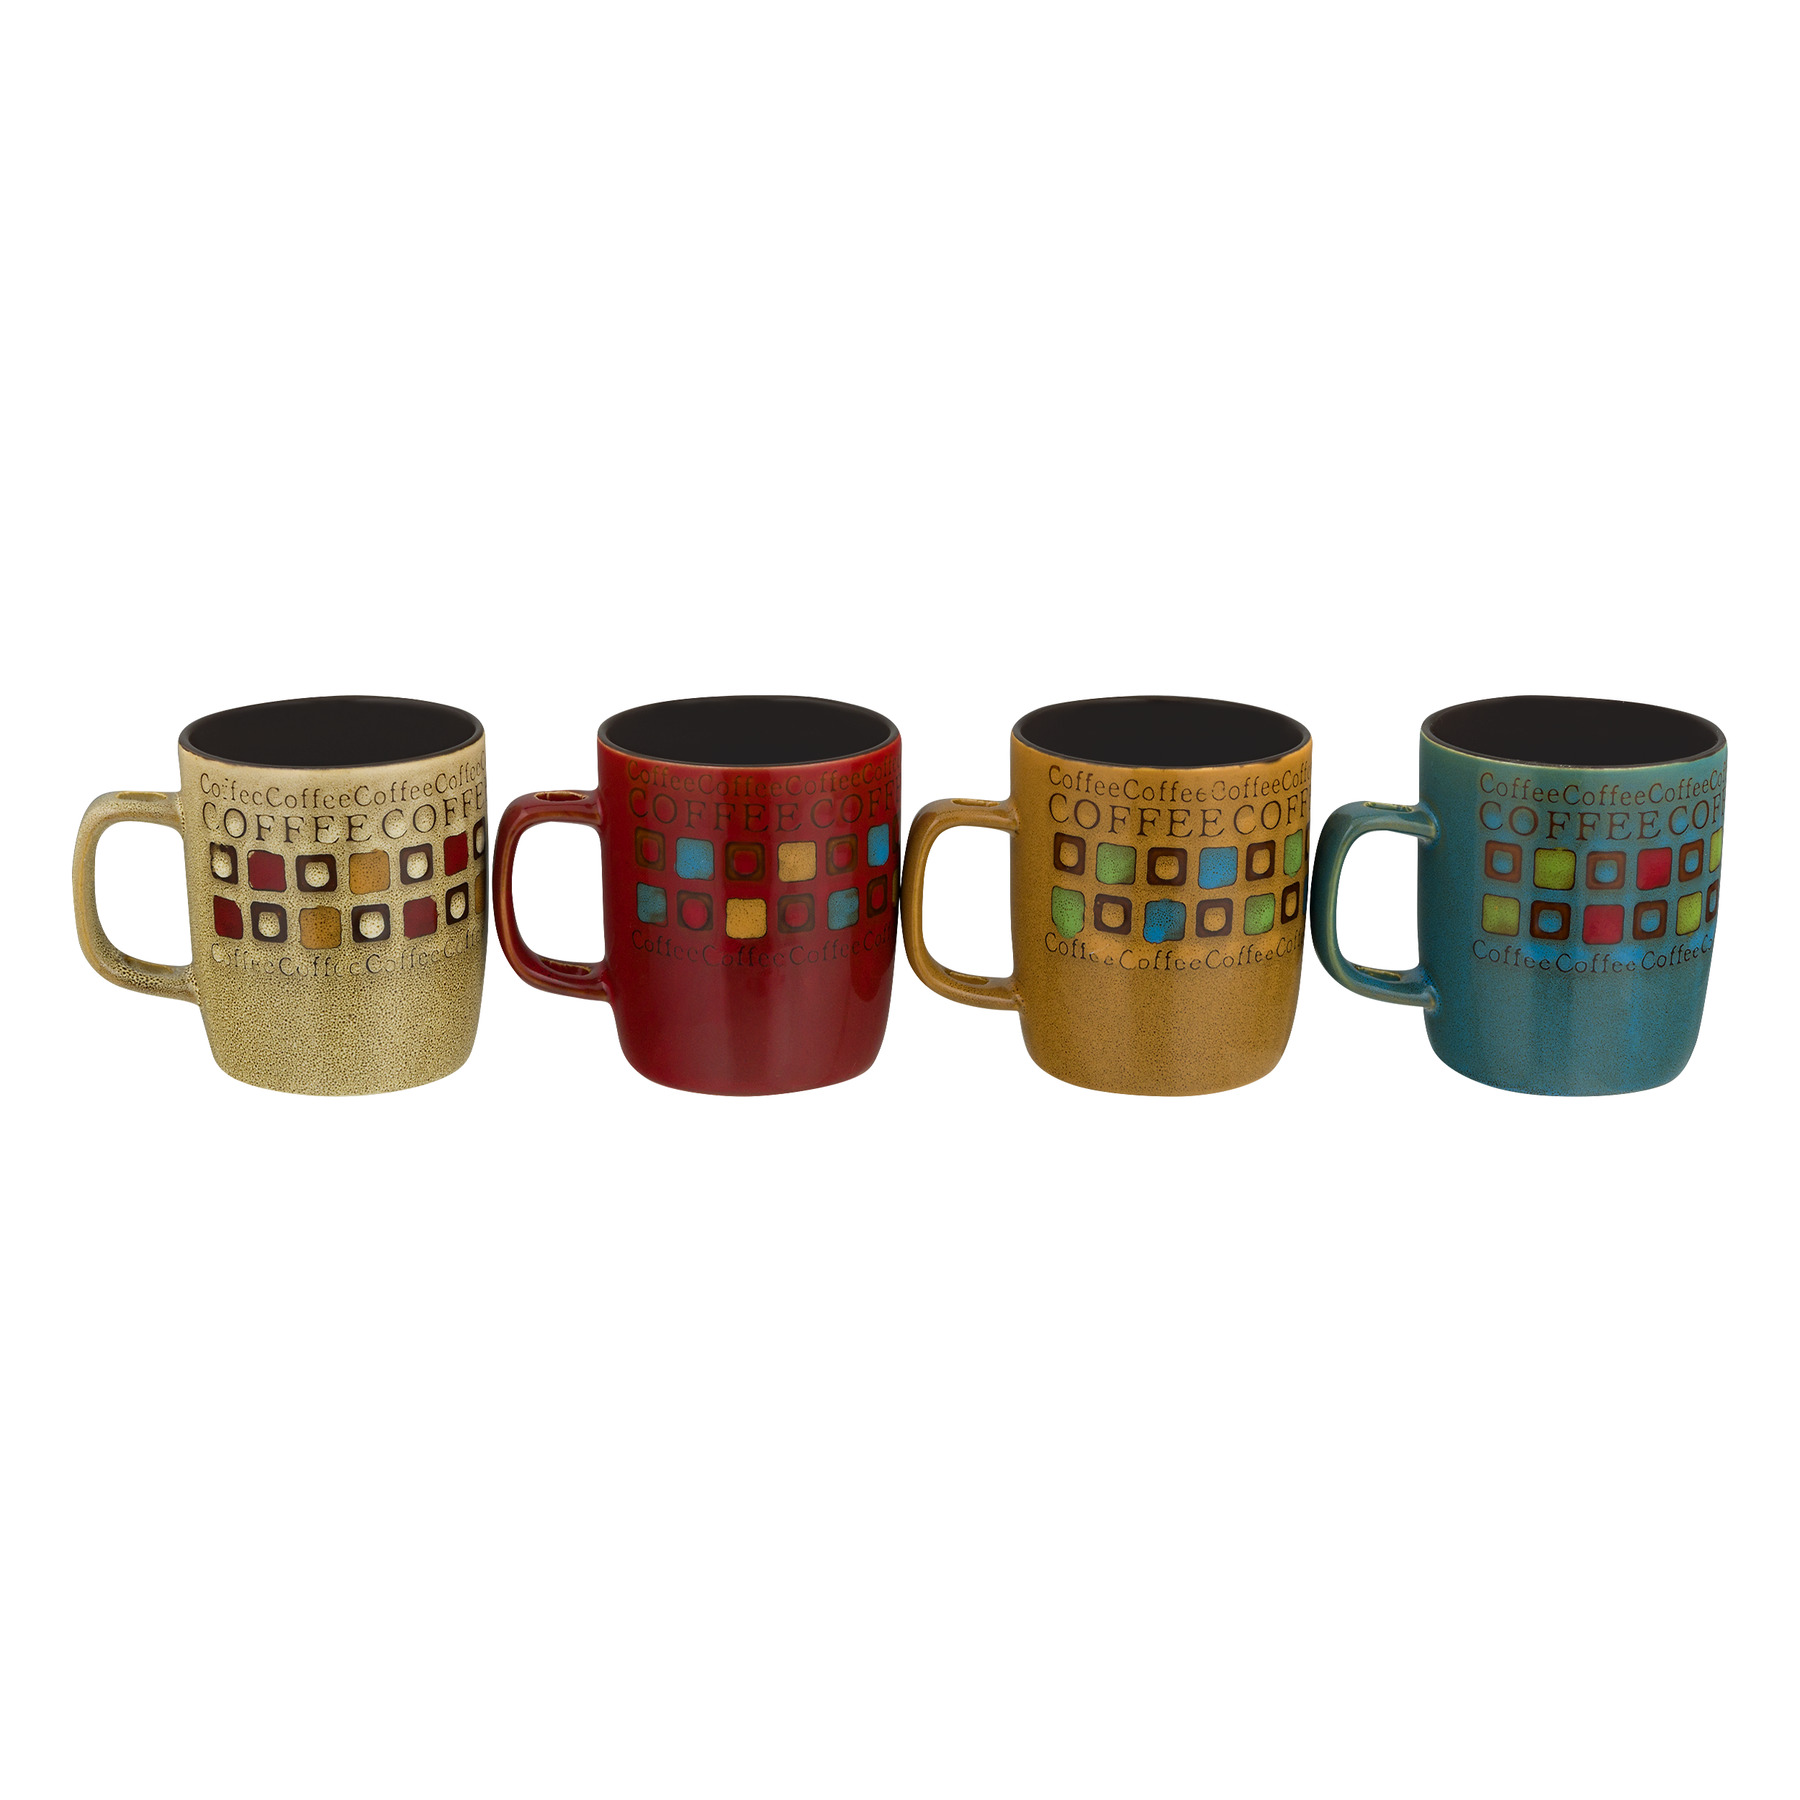 Mr. Coffee Cafe Americano Mugs With Spoons - 8 PC, 8.0 PIECE(S) - image 1 of 5